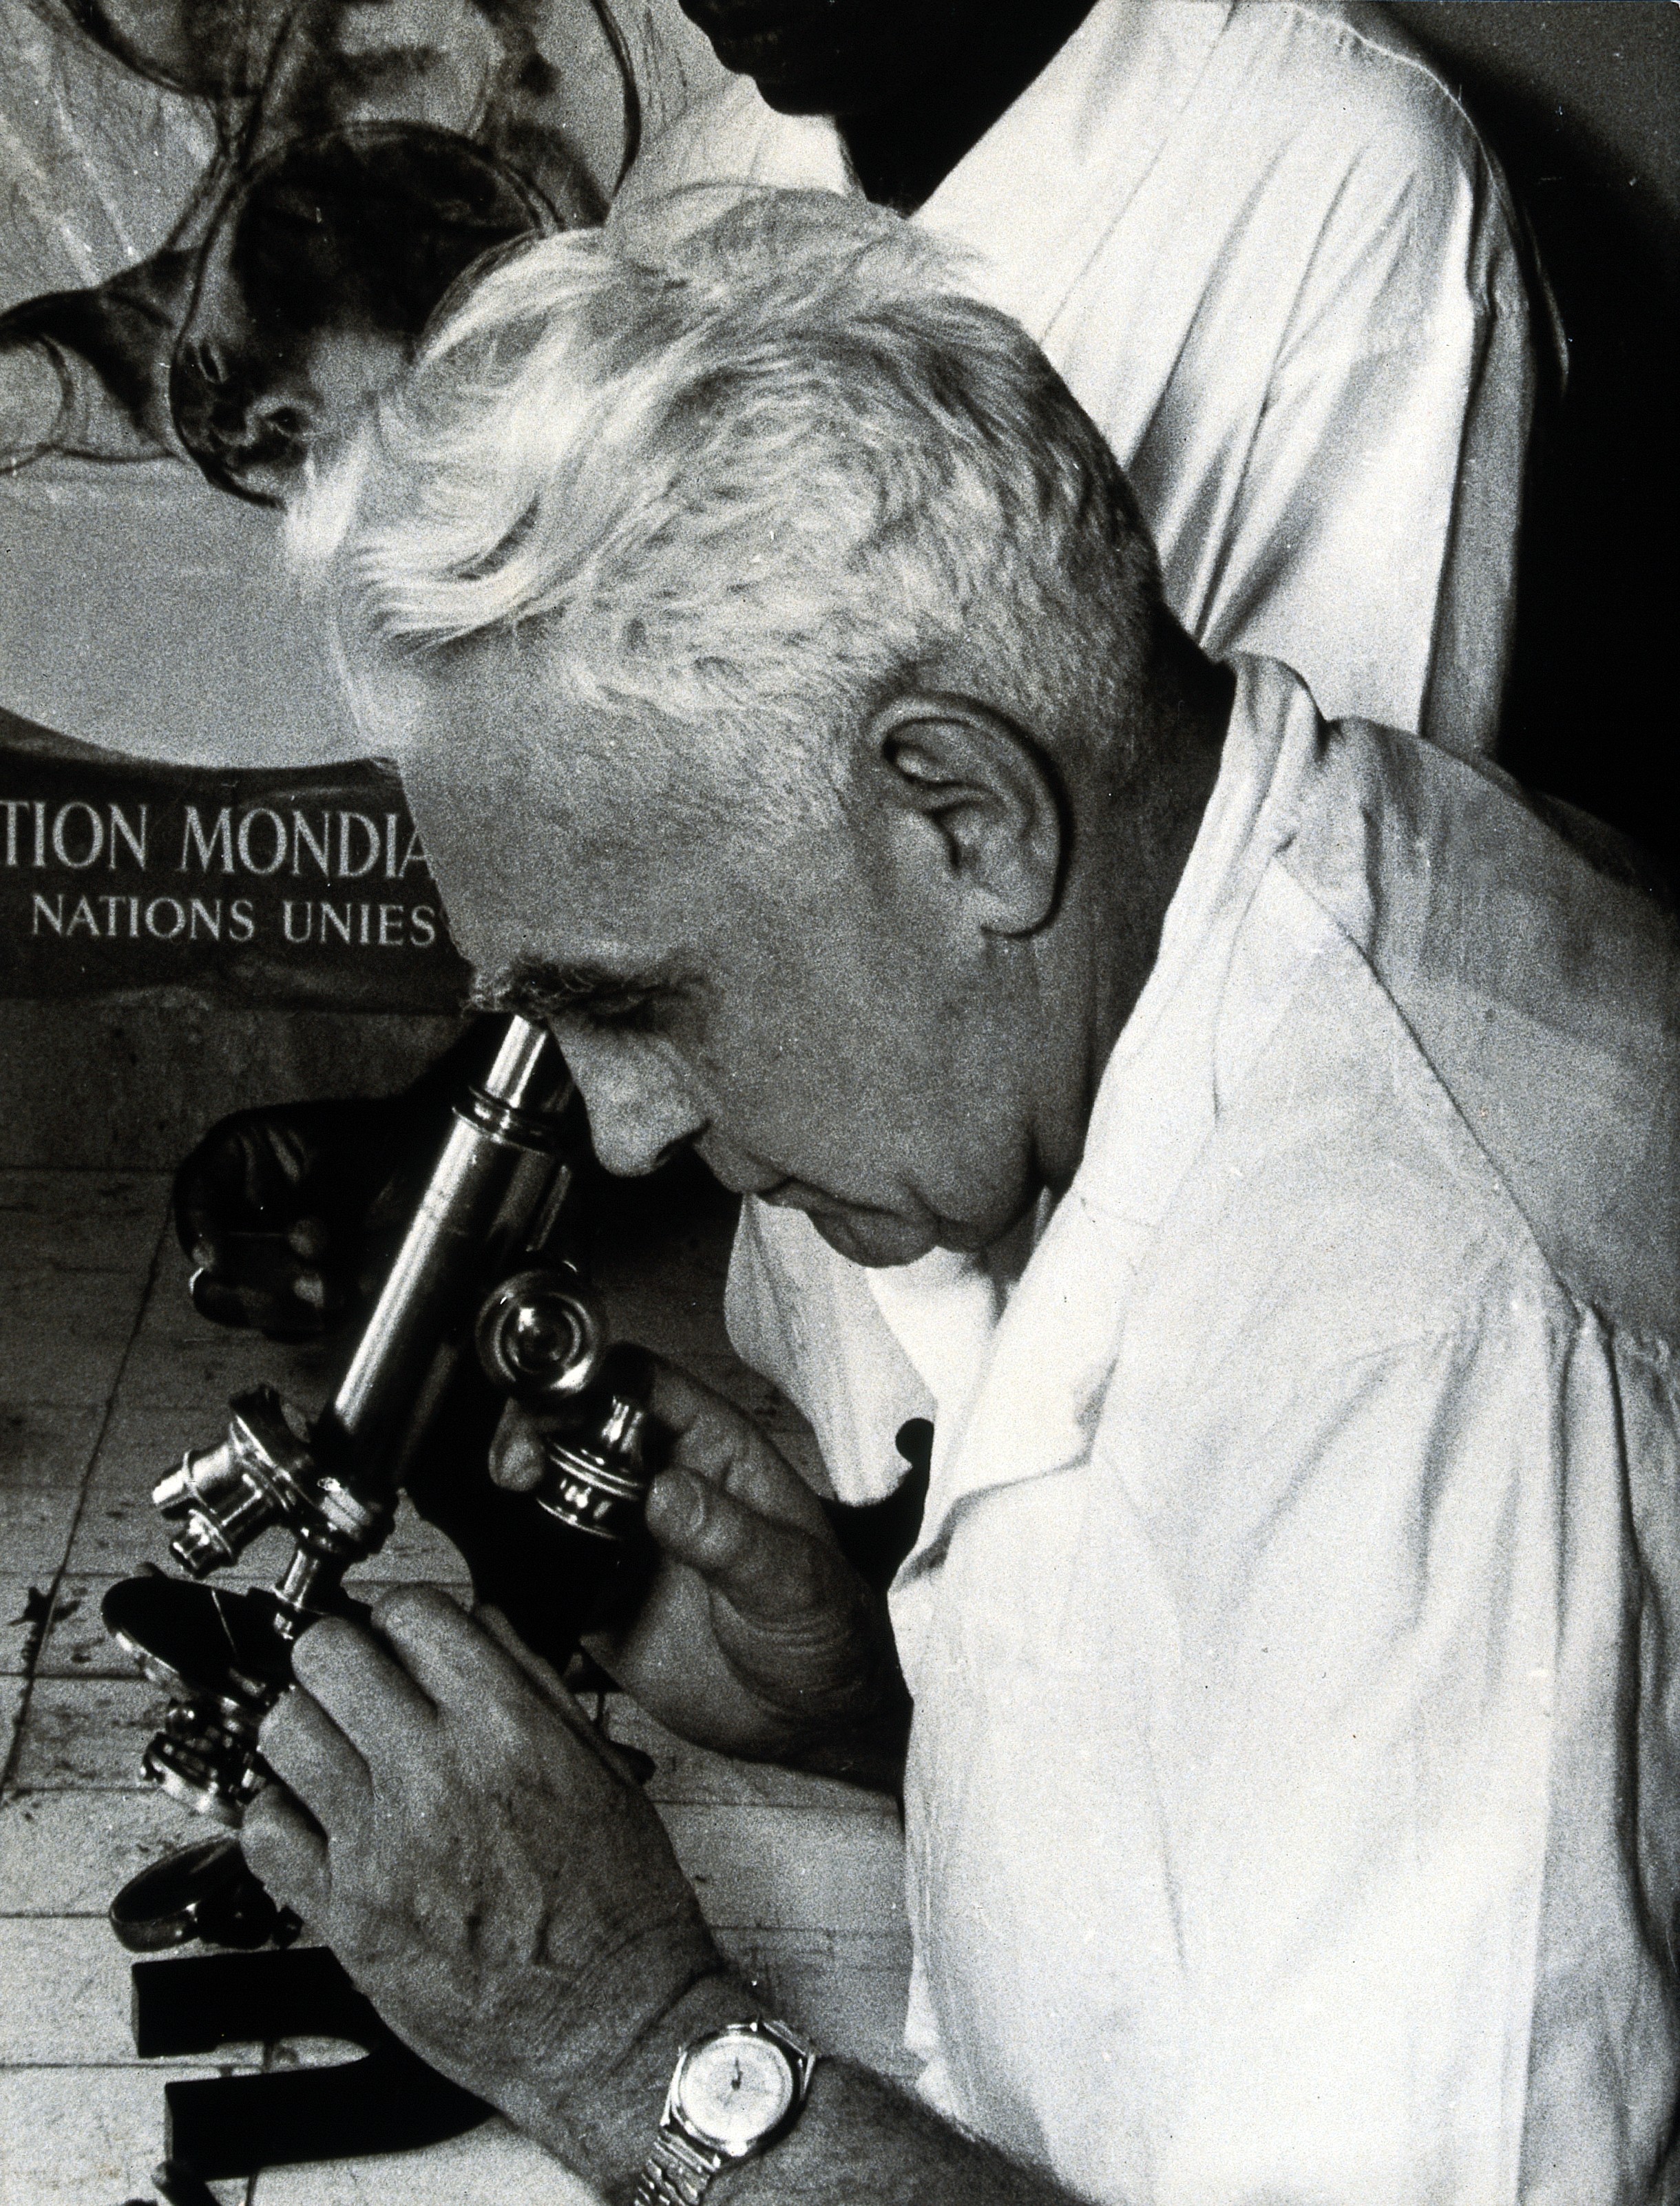 L. Morin looking at some microscopic slides. Photograph by L Wellcome V0027994